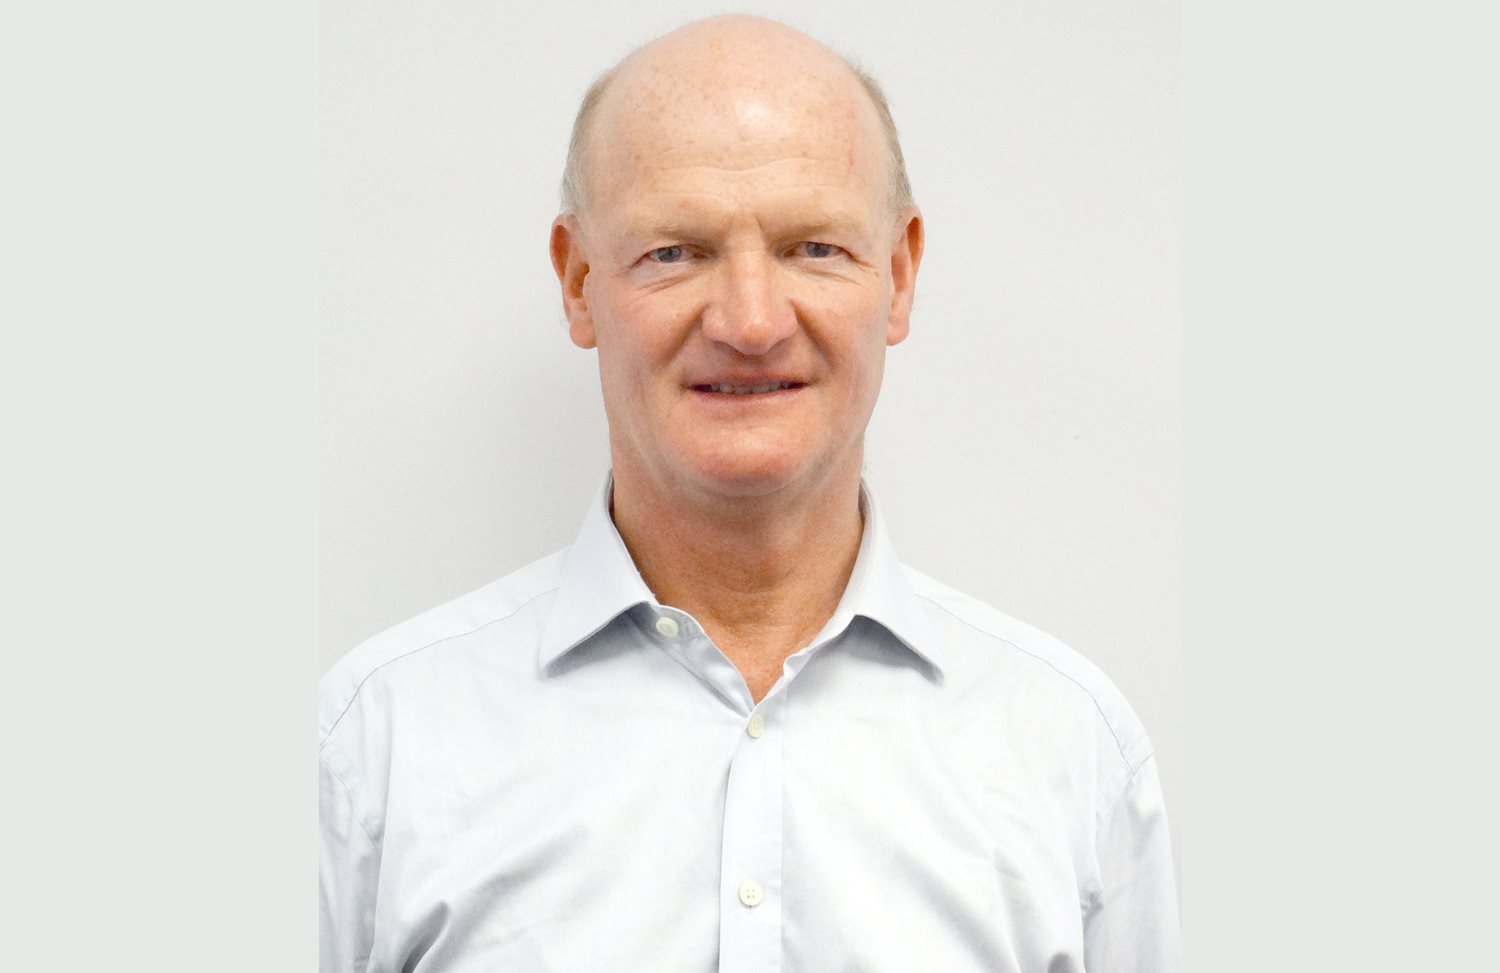 David Willetts joins SSTL's Board as a Non-Executive Director